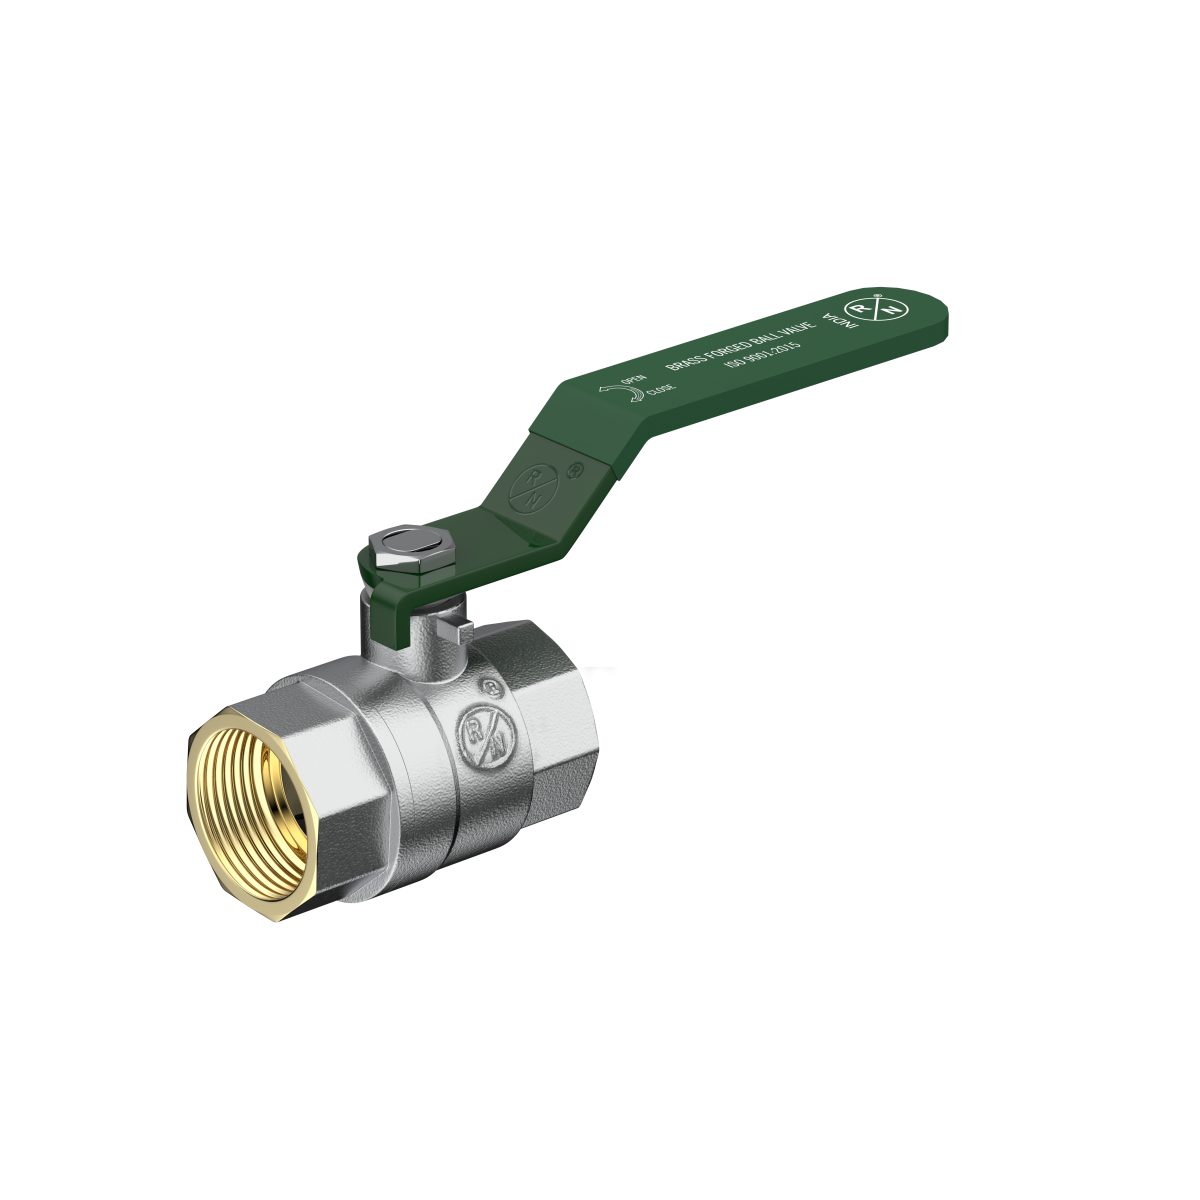 RN Forged Brass Ball Valve, Nickel Plated